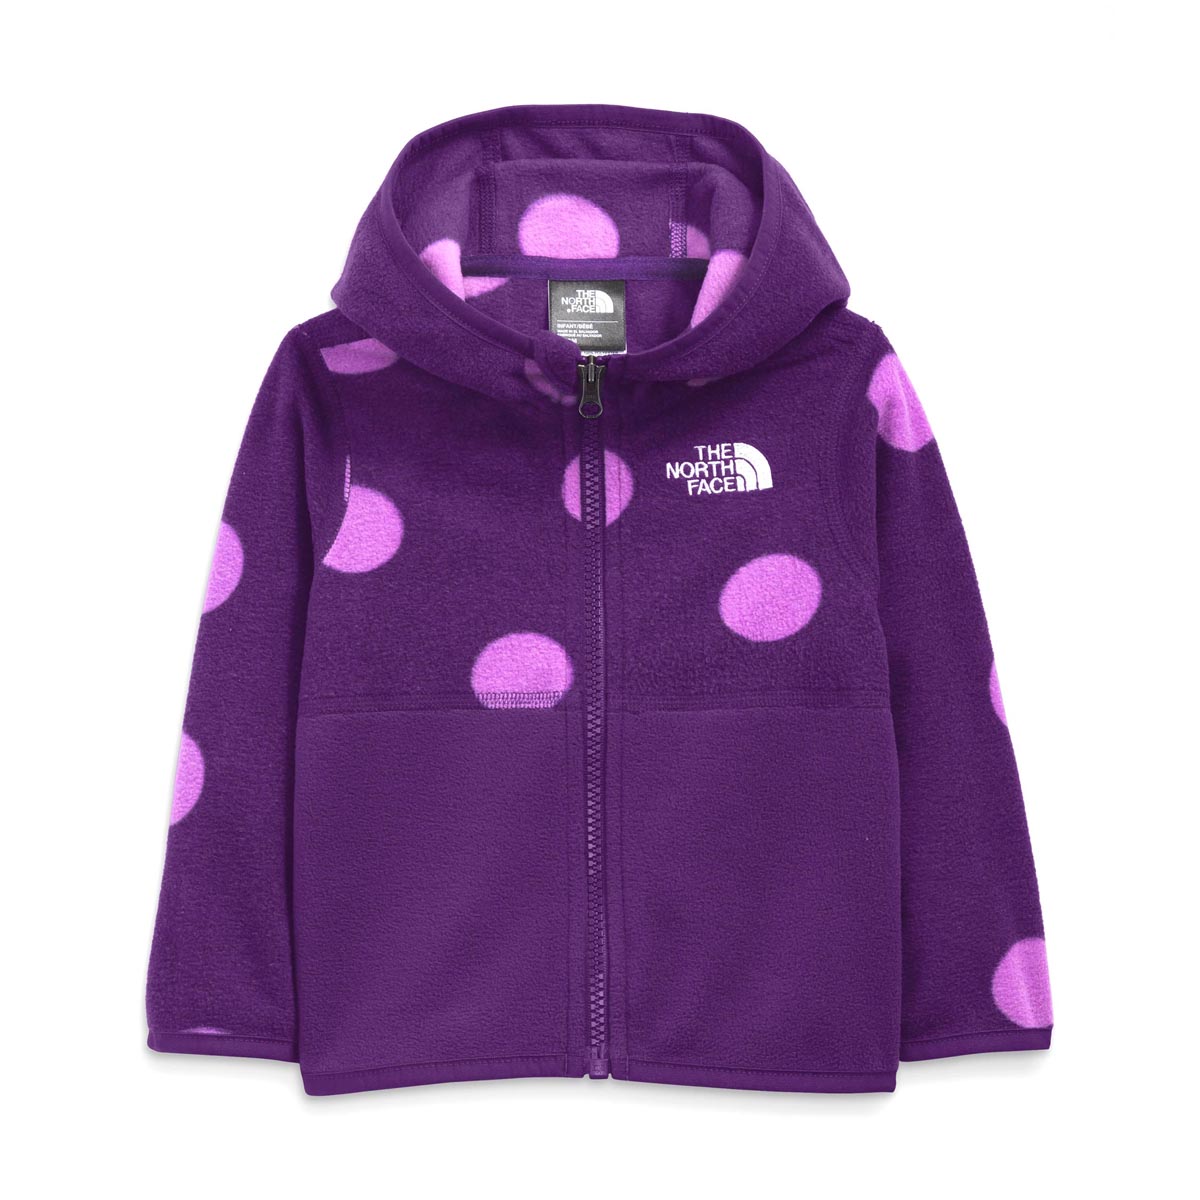 The North Face Infants' Glacier Full Zip Hoodie